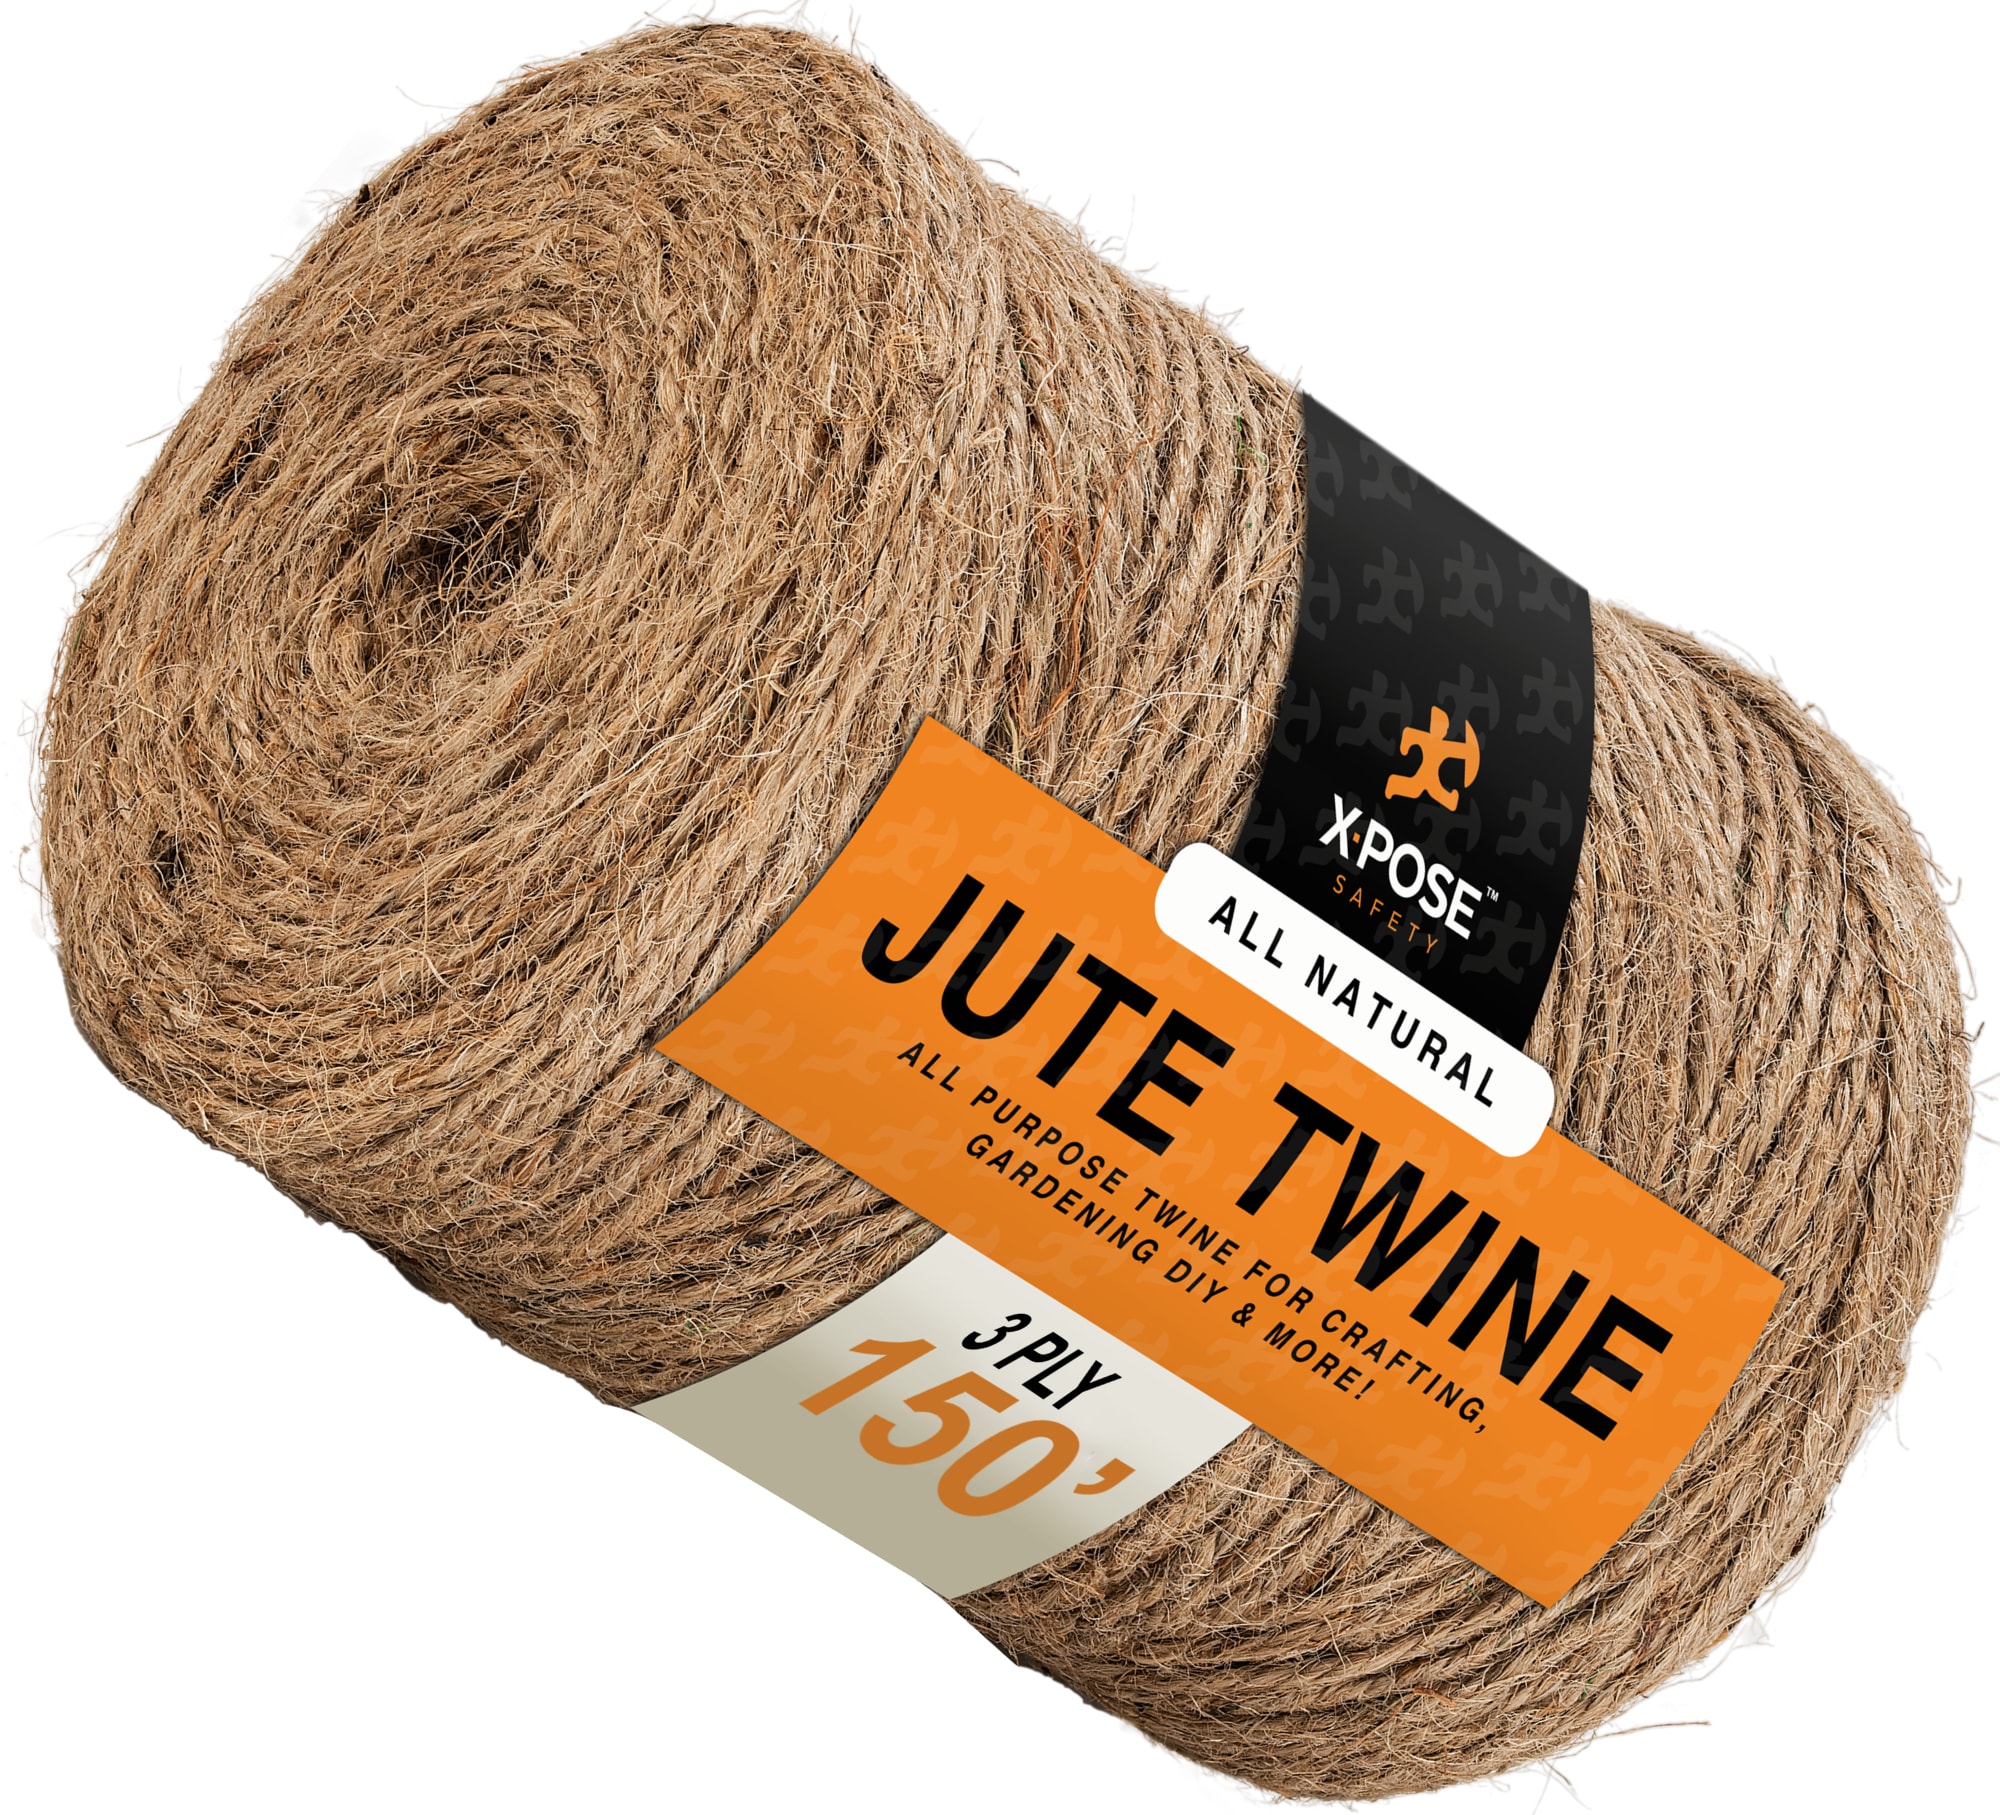 Jute Chains, Ropes & Tie-Downs at